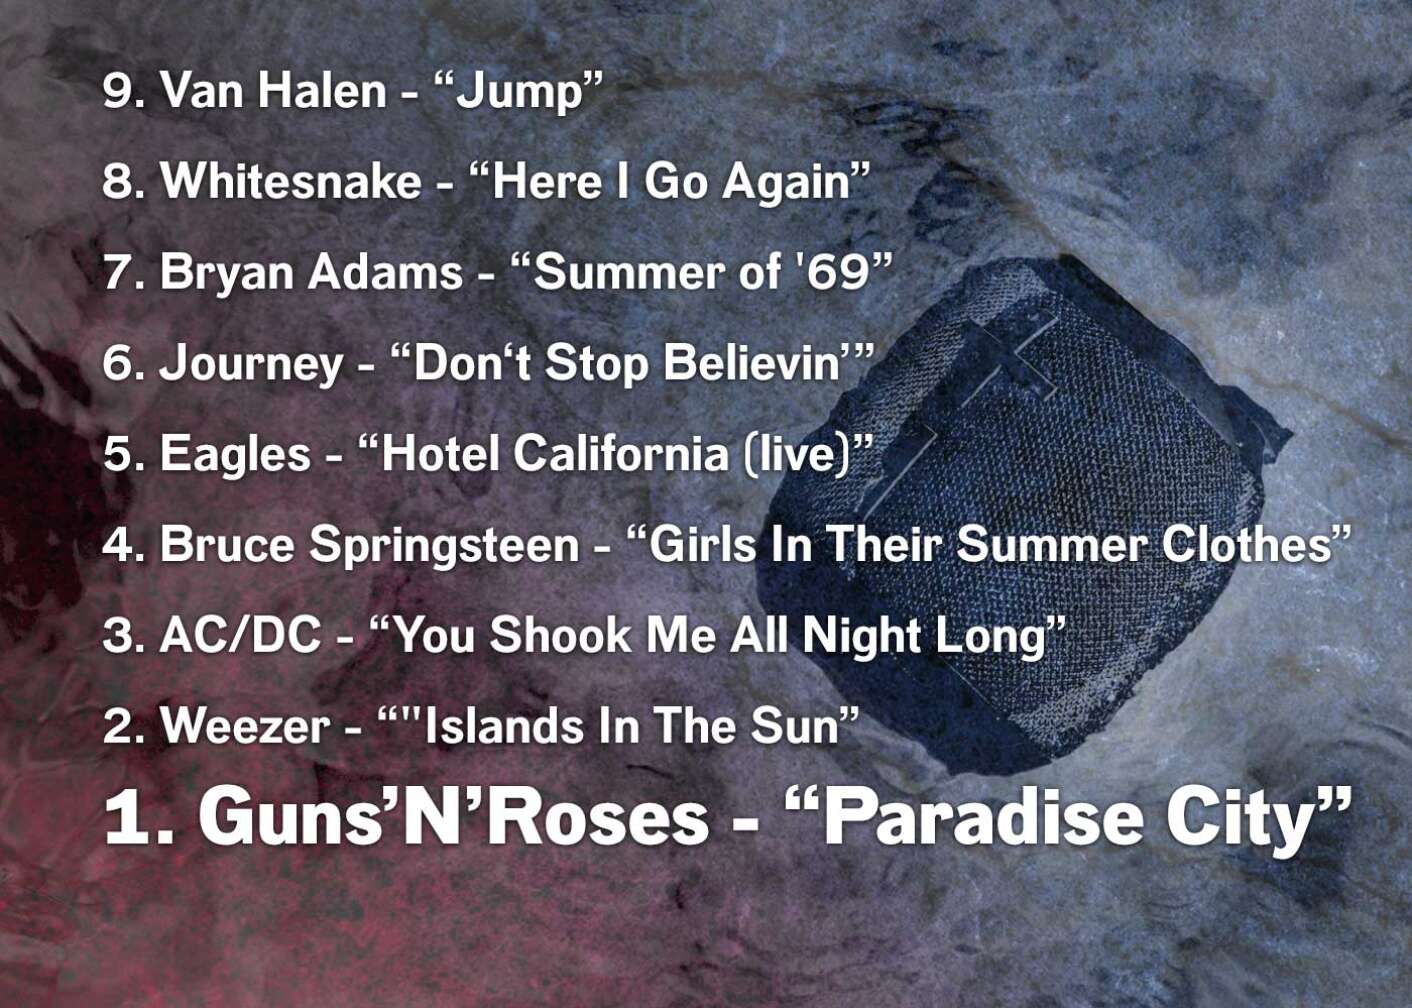 9. Van Halen - “Jump” 8. Whitesnake - “Here I Go Again” 7. Bryan Adams - “Summer of '69” 6. Journey - “Don‘t Stop Believin’” 5. Eagles - “Hotel California (live)” 4. Bruce Springsteen - “Girls In Their Summer Clothes” 3. AC/DC - “You Shook Me All Night Long” 2. Weezer - “"Islands In The Sun” 1. Guns’N’Roses - “Paradise City”